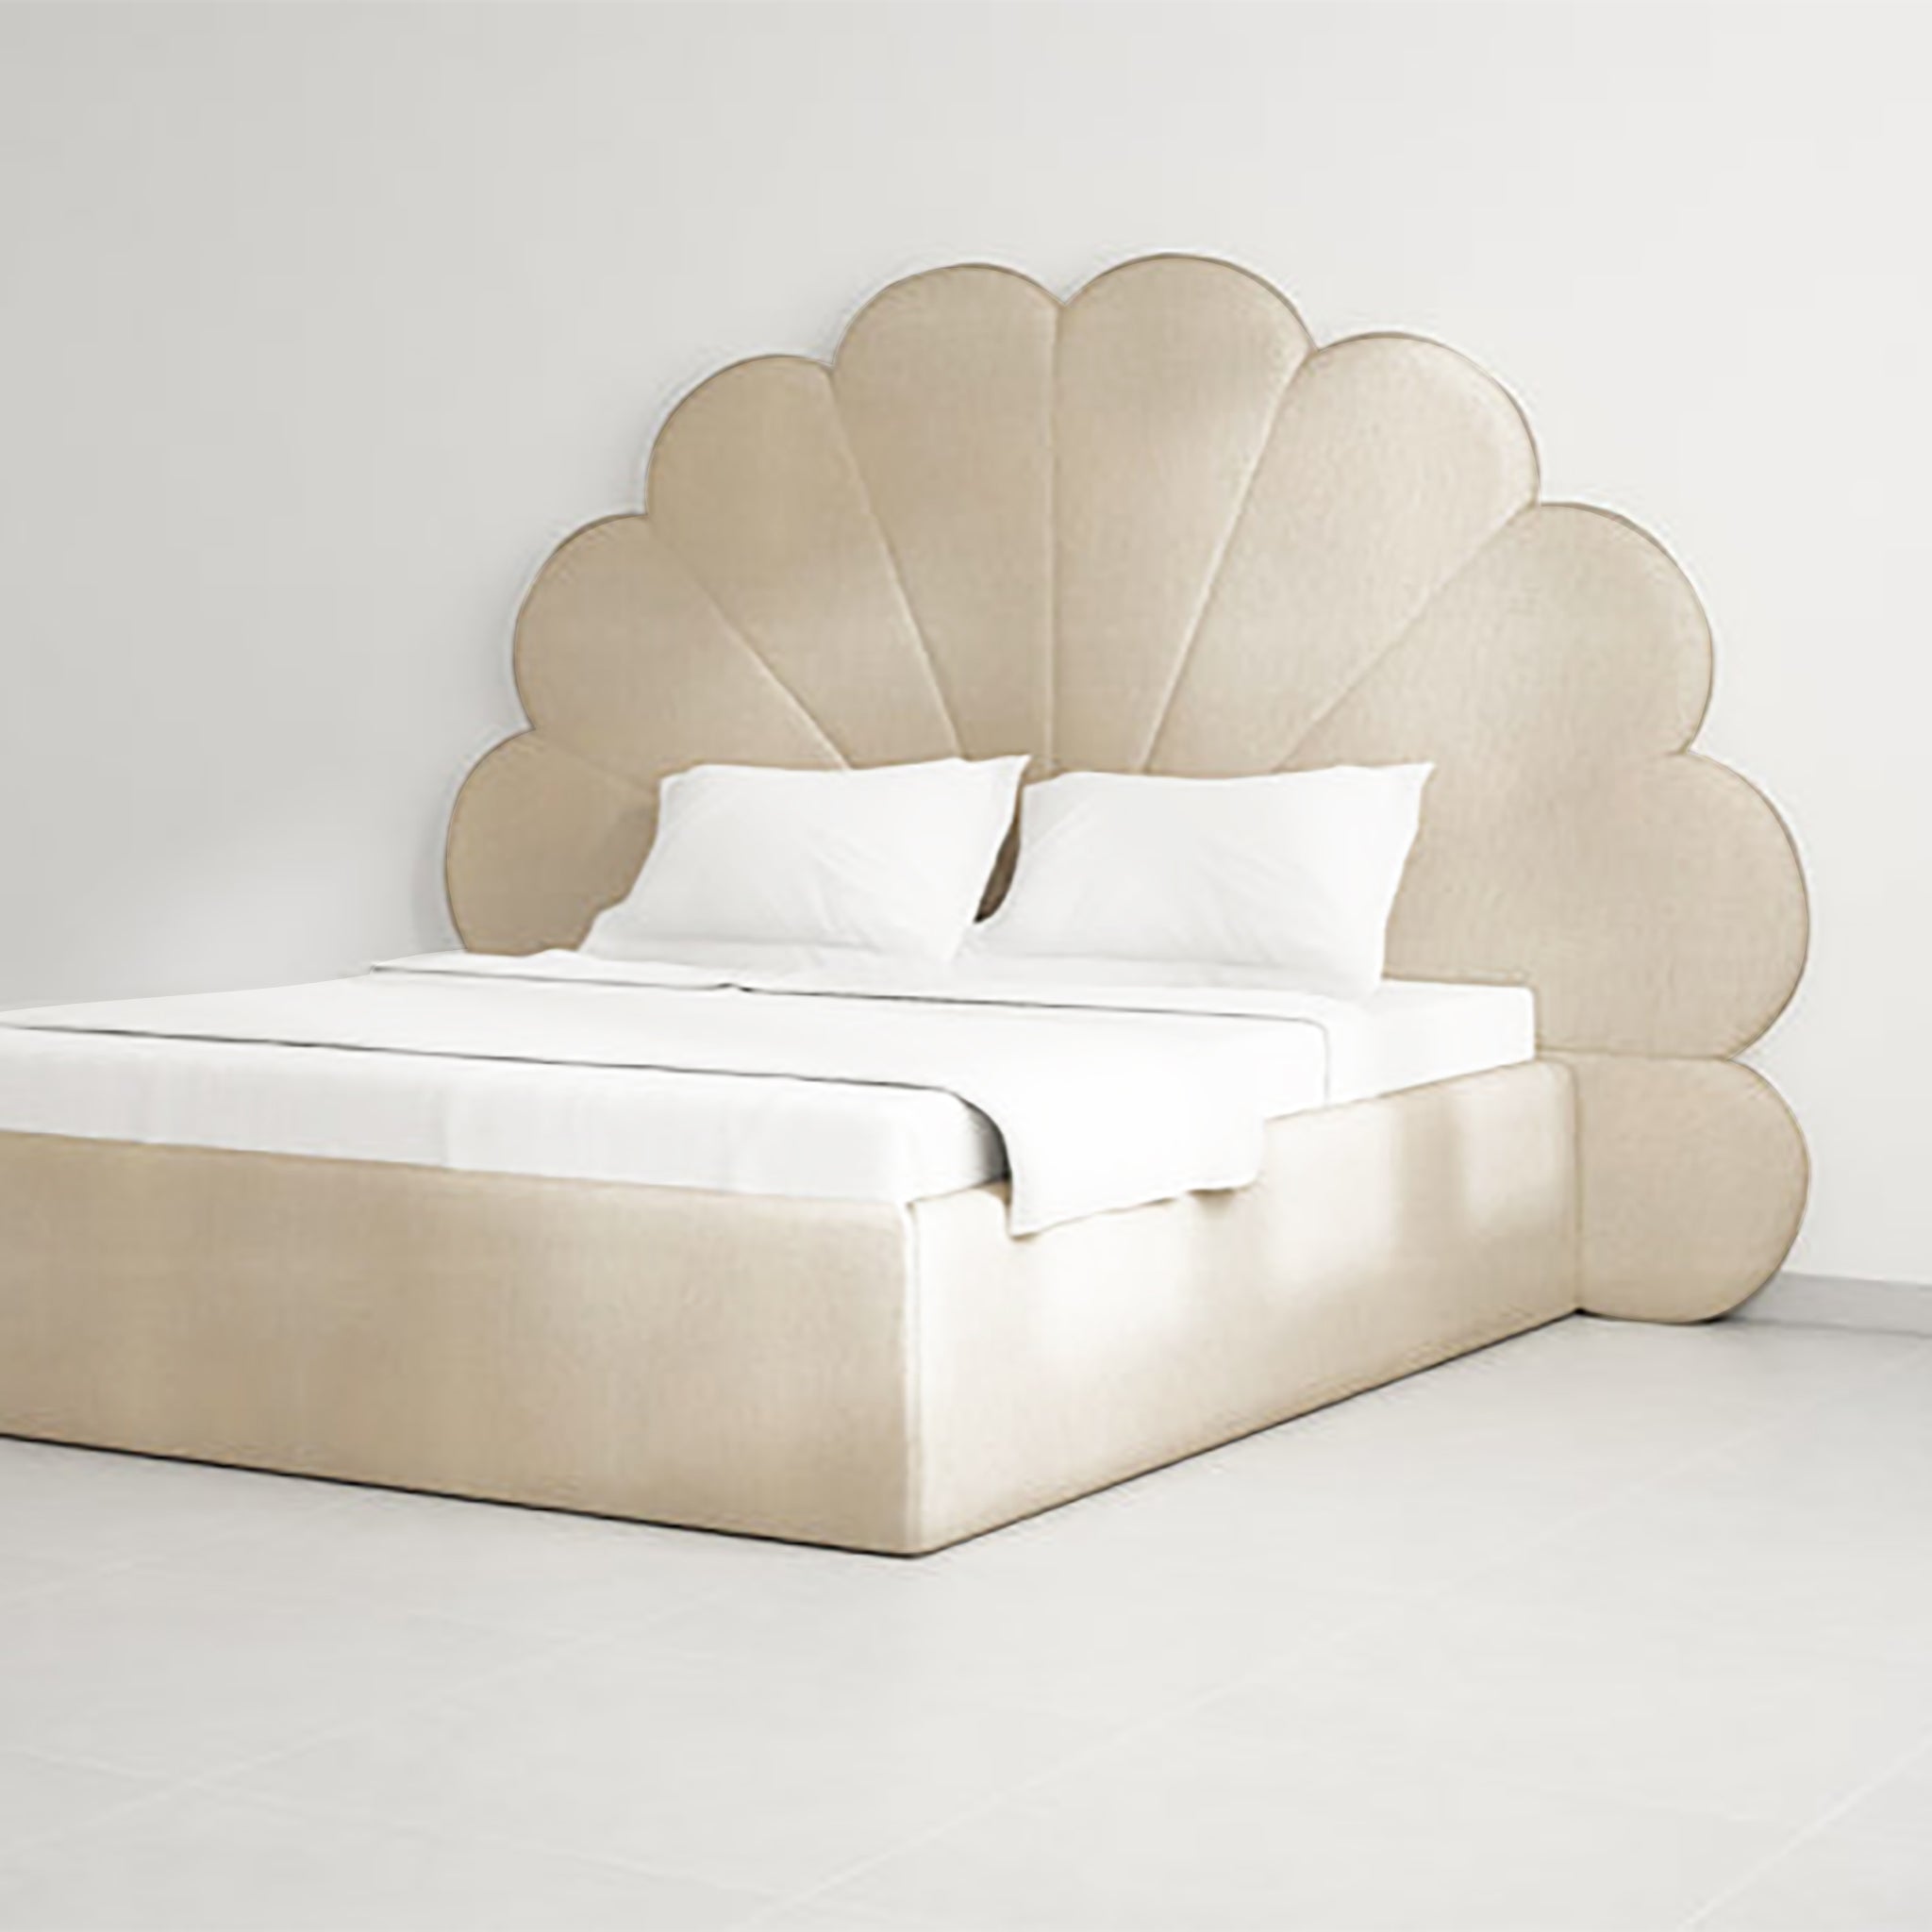 The Kyle Bed in a sophisticated master bedroom decor